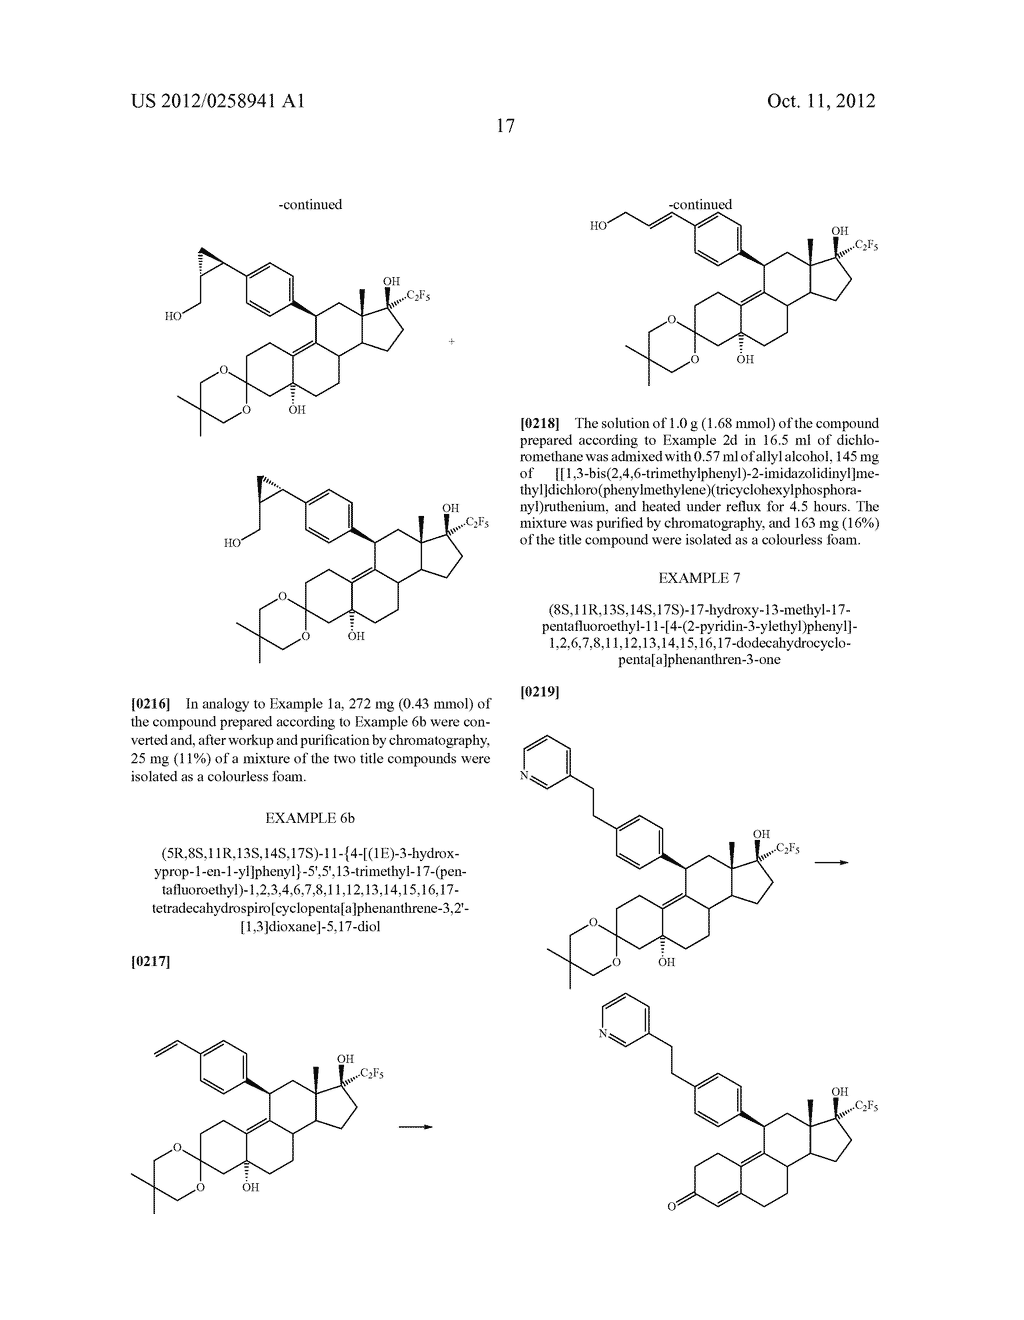 17-HYDROXY-17-PENTAFLUORETHYL-ESTRA-4,9(10)-DIEN-11-ARYL DERIVATIVES,     METHODS FOR THE PRODUCTION THEREOF AND THE USE THEREOF FOR TREATING     DISEASES - diagram, schematic, and image 18